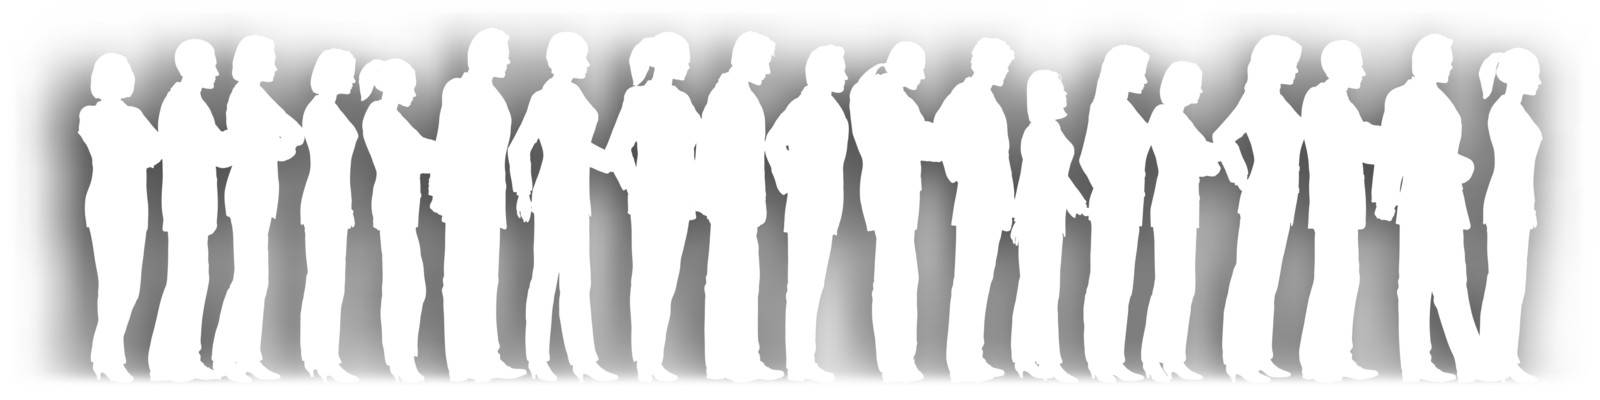 Editable vector cutout of people standing in a queue with background shadow made using a gradient mesh